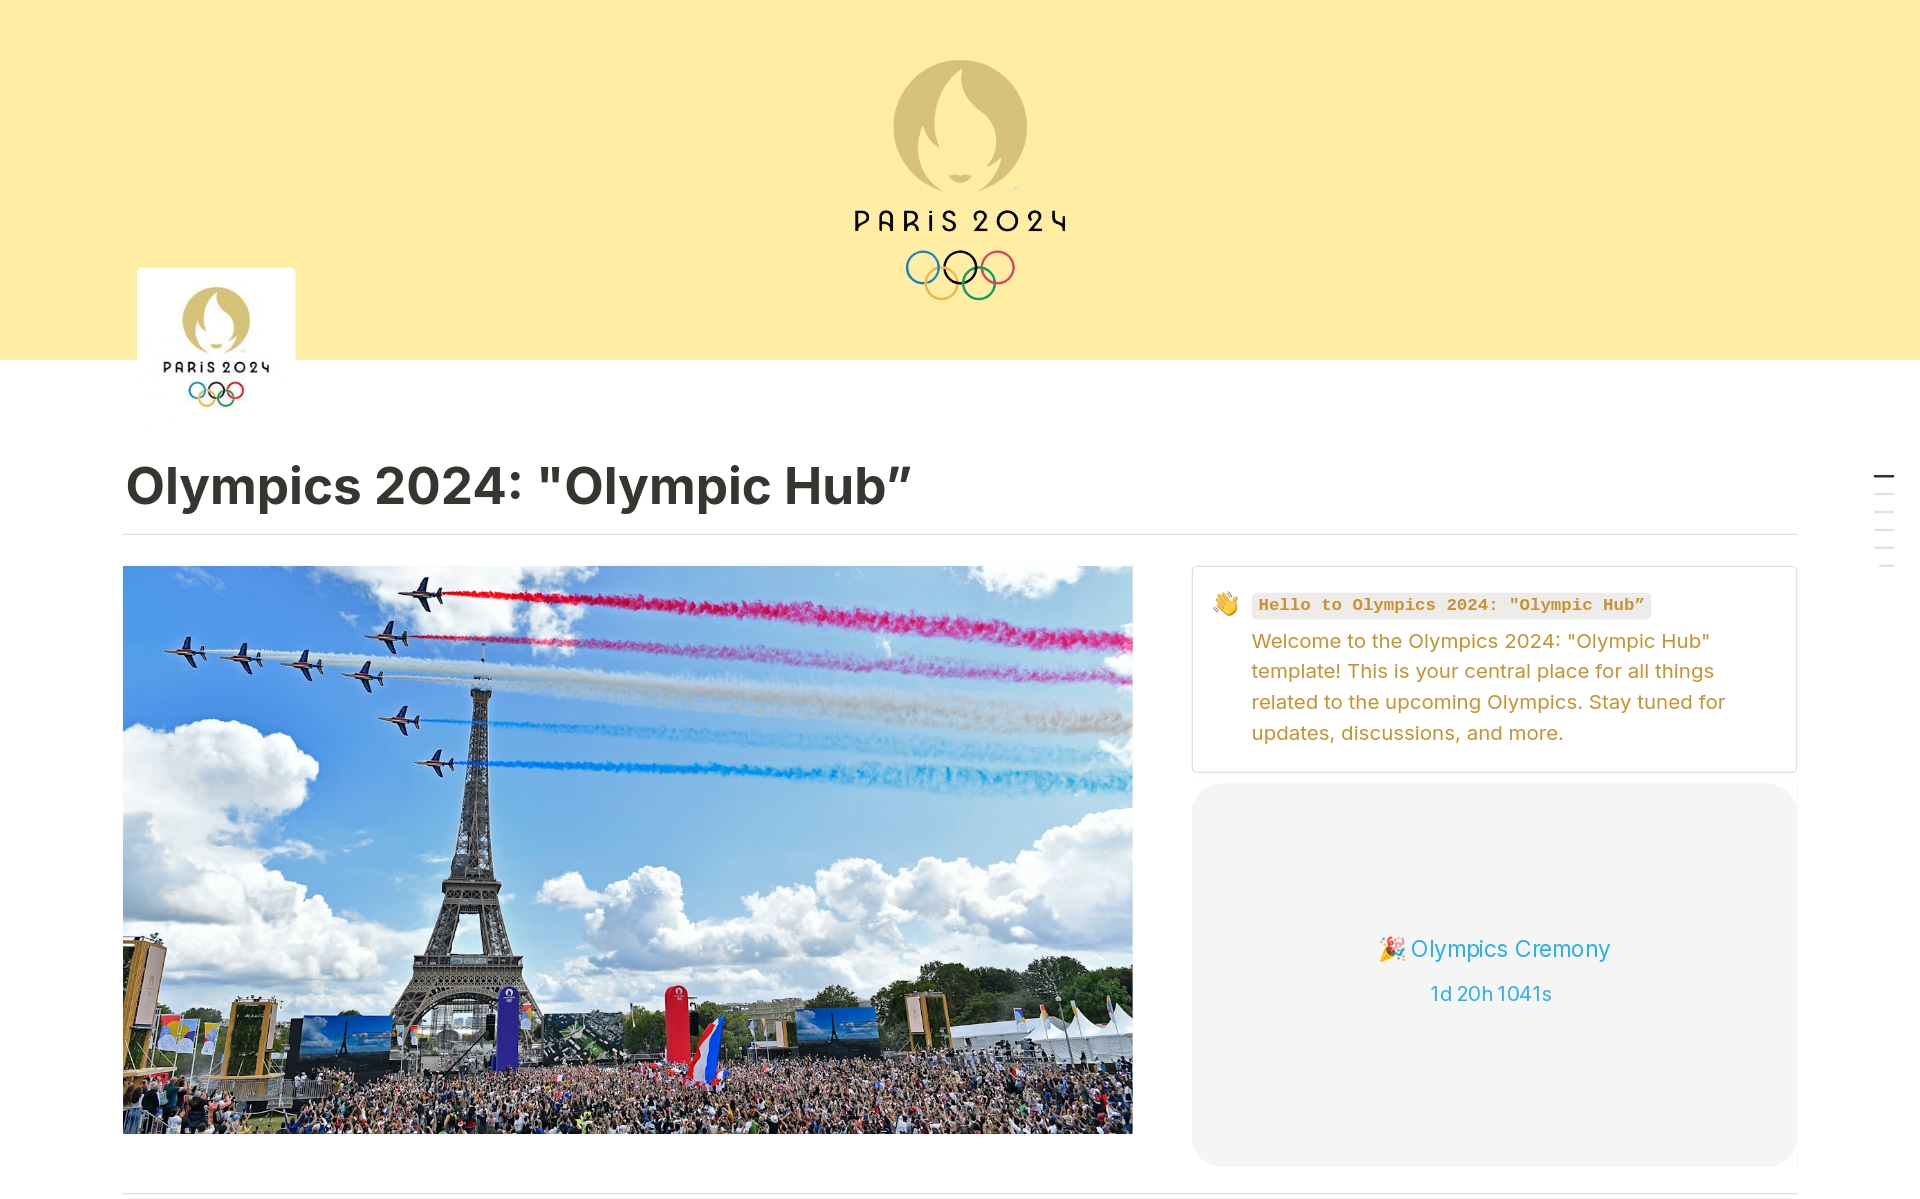 The Olympics 2024: "Olympic Hub" template is a central hub for all things related to the upcoming Olympics. It includes sections for:

- ⚽ Sports and events tracking
- 📝 Olympic journal
- 🗣️ Community discussions
- 📱 Social media updates